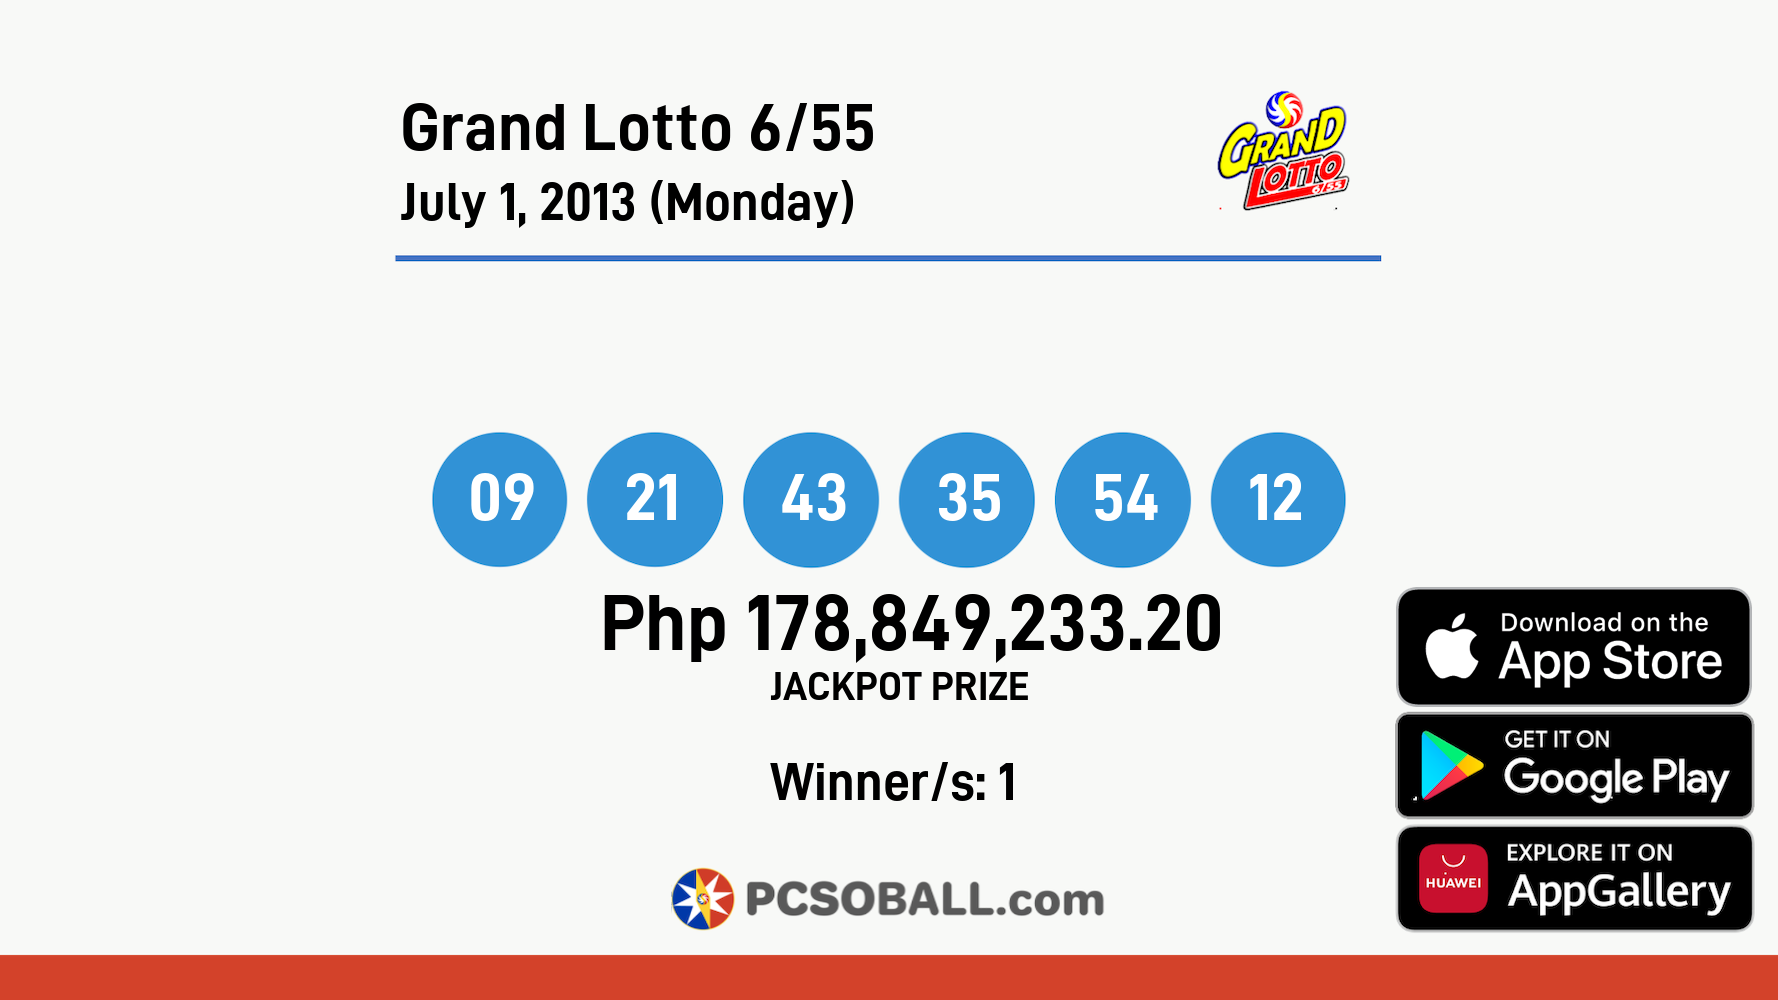 Grand Lotto 6/55 July 1, 2013 (Monday) Result